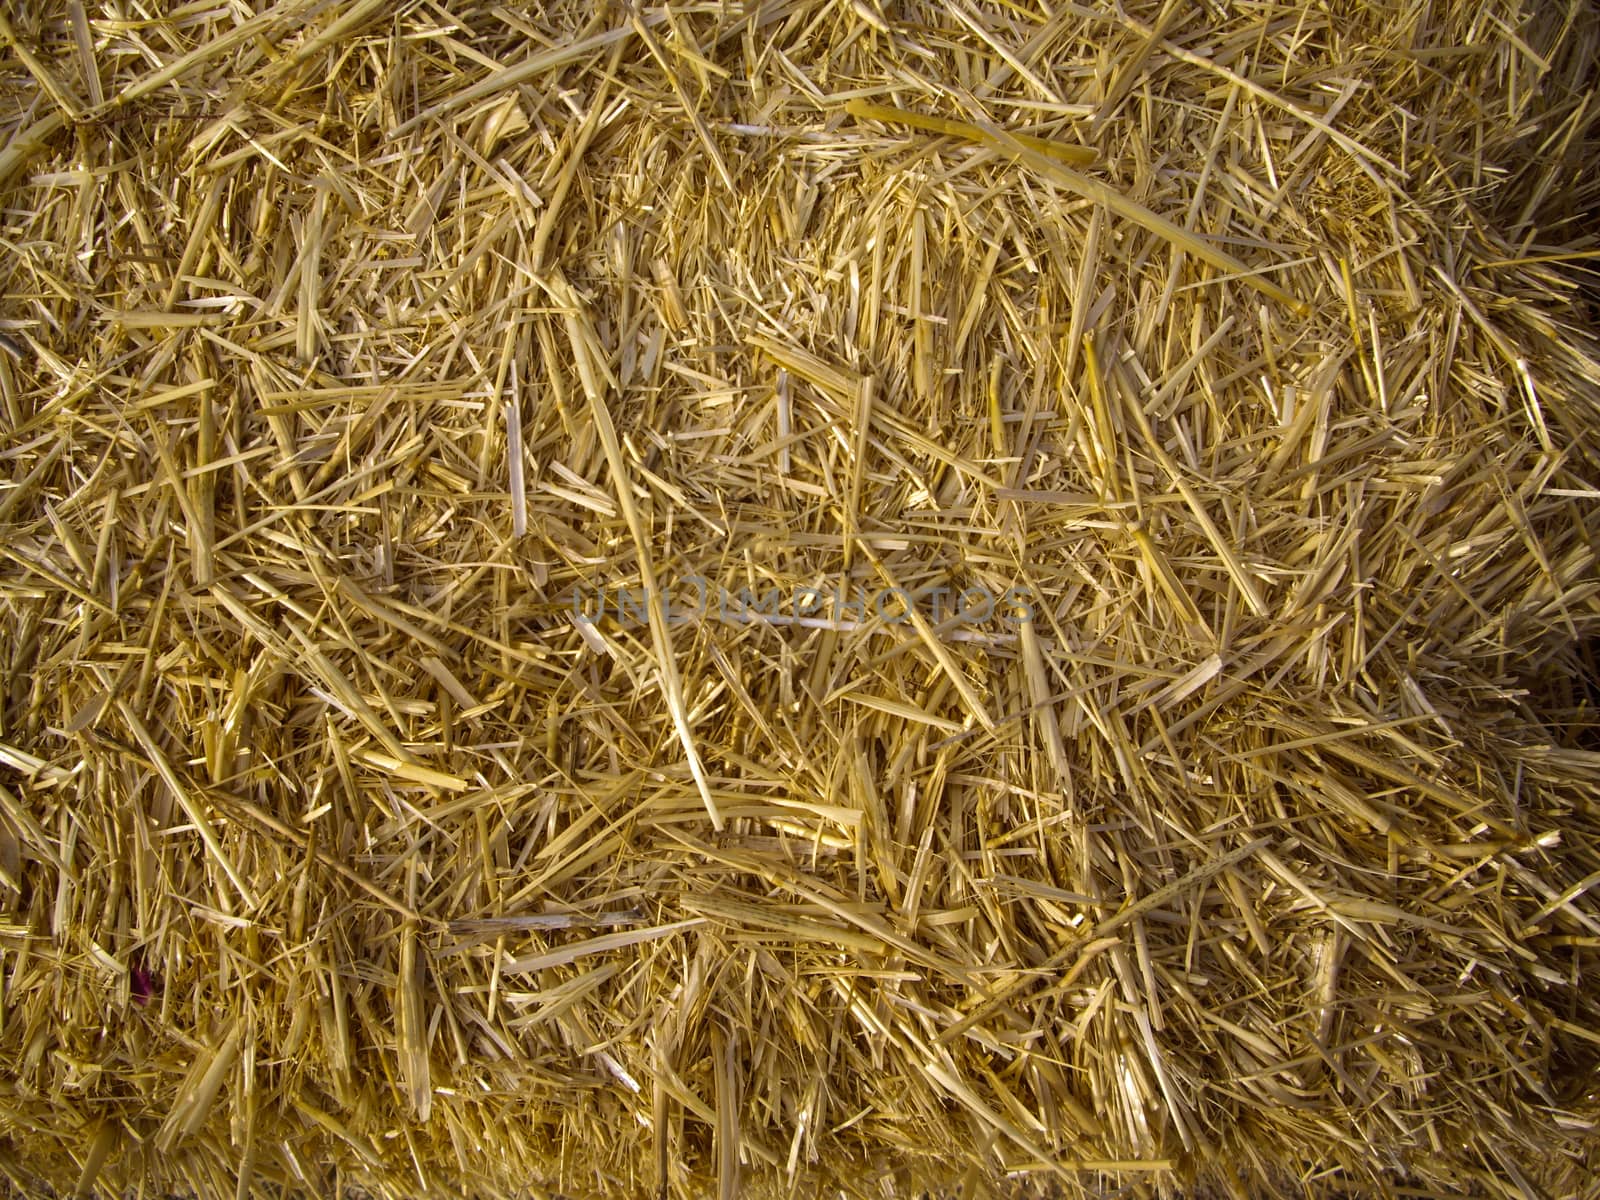 Straw of hay bale